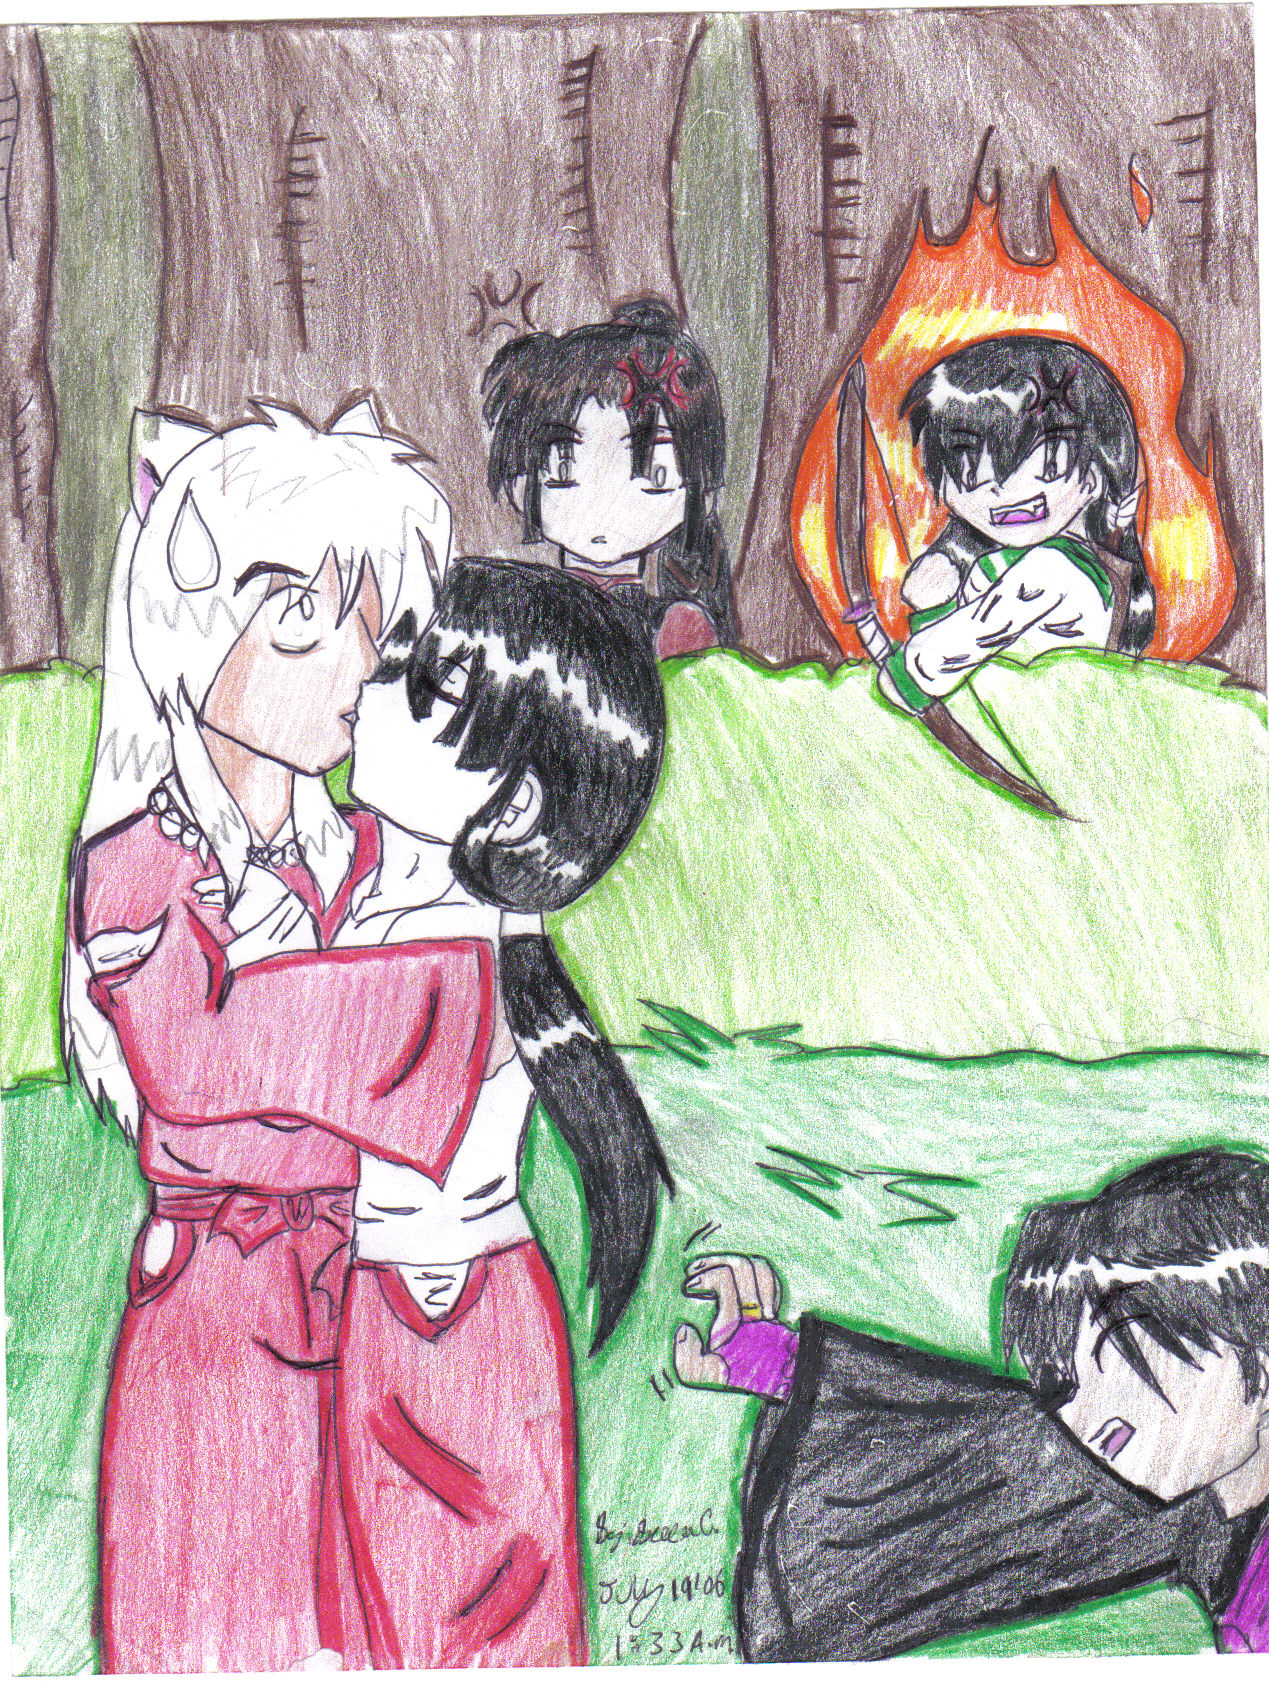 inuyasha you're busted! by Koolkat6968